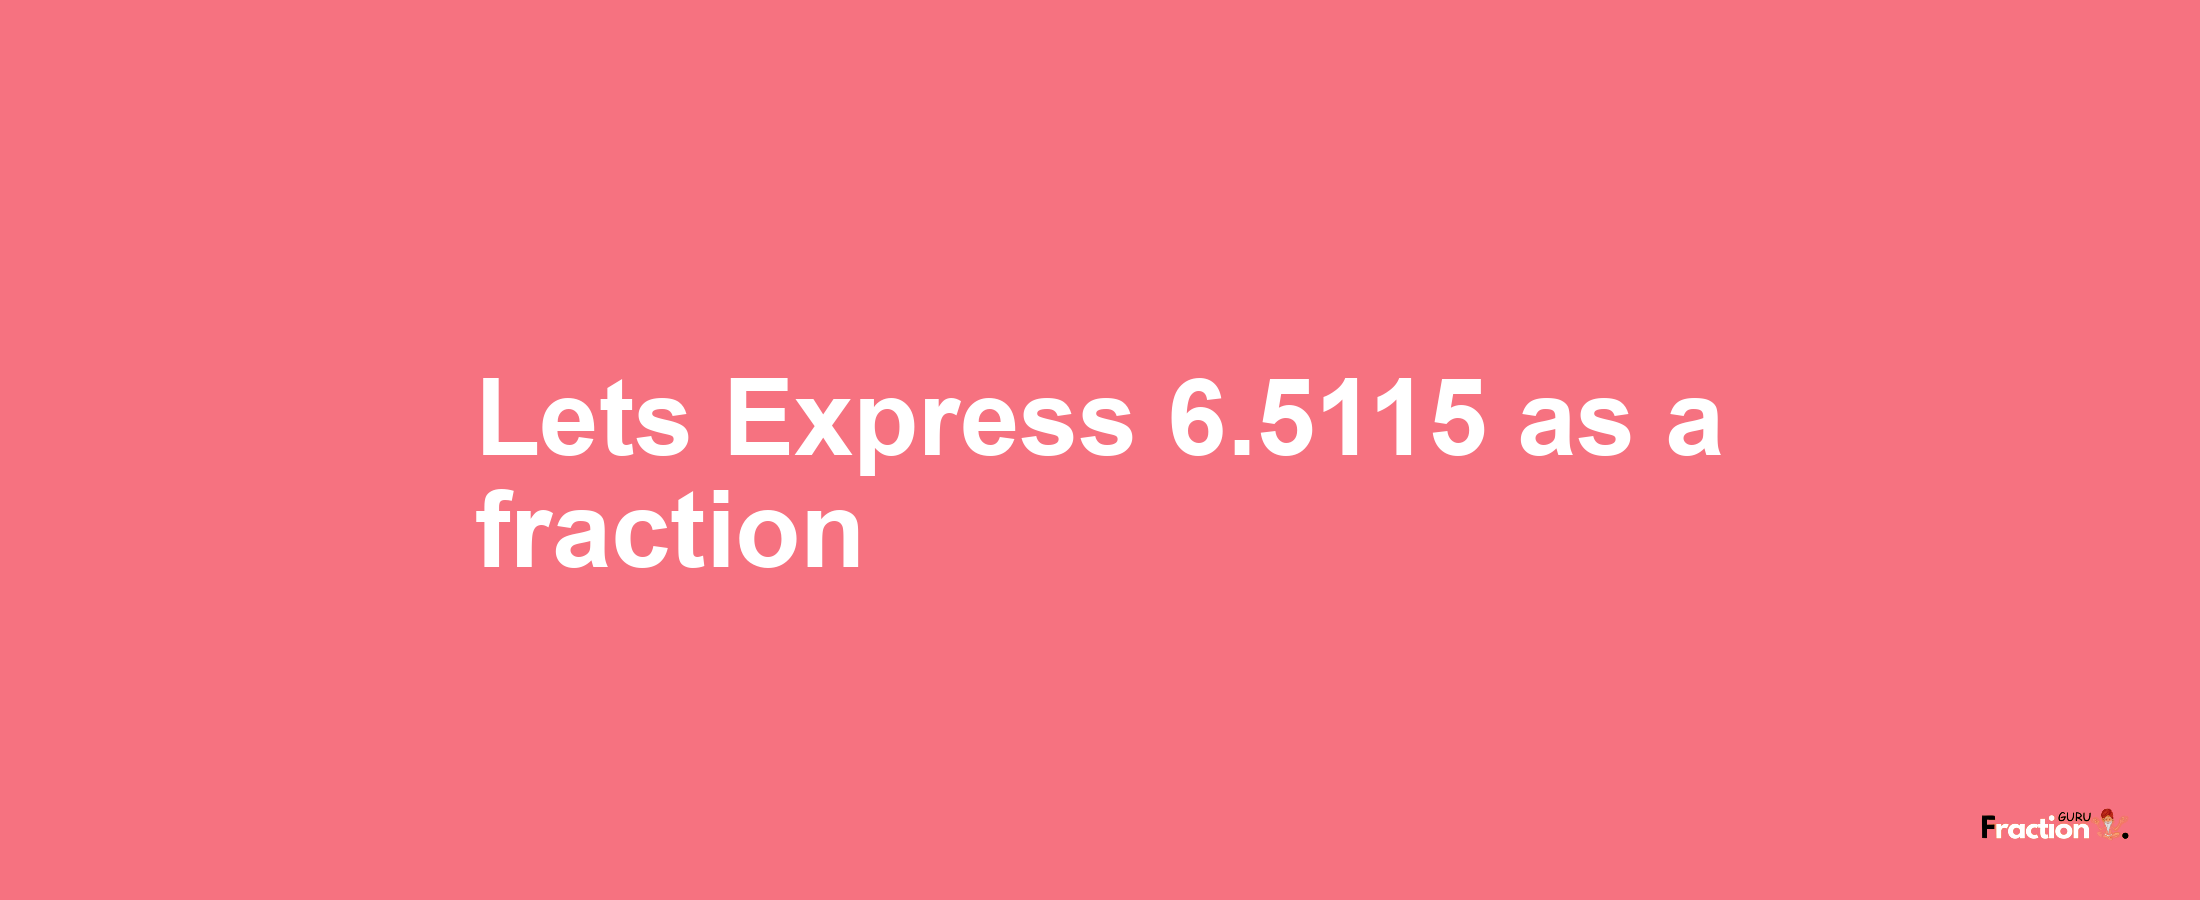 Lets Express 6.5115 as afraction